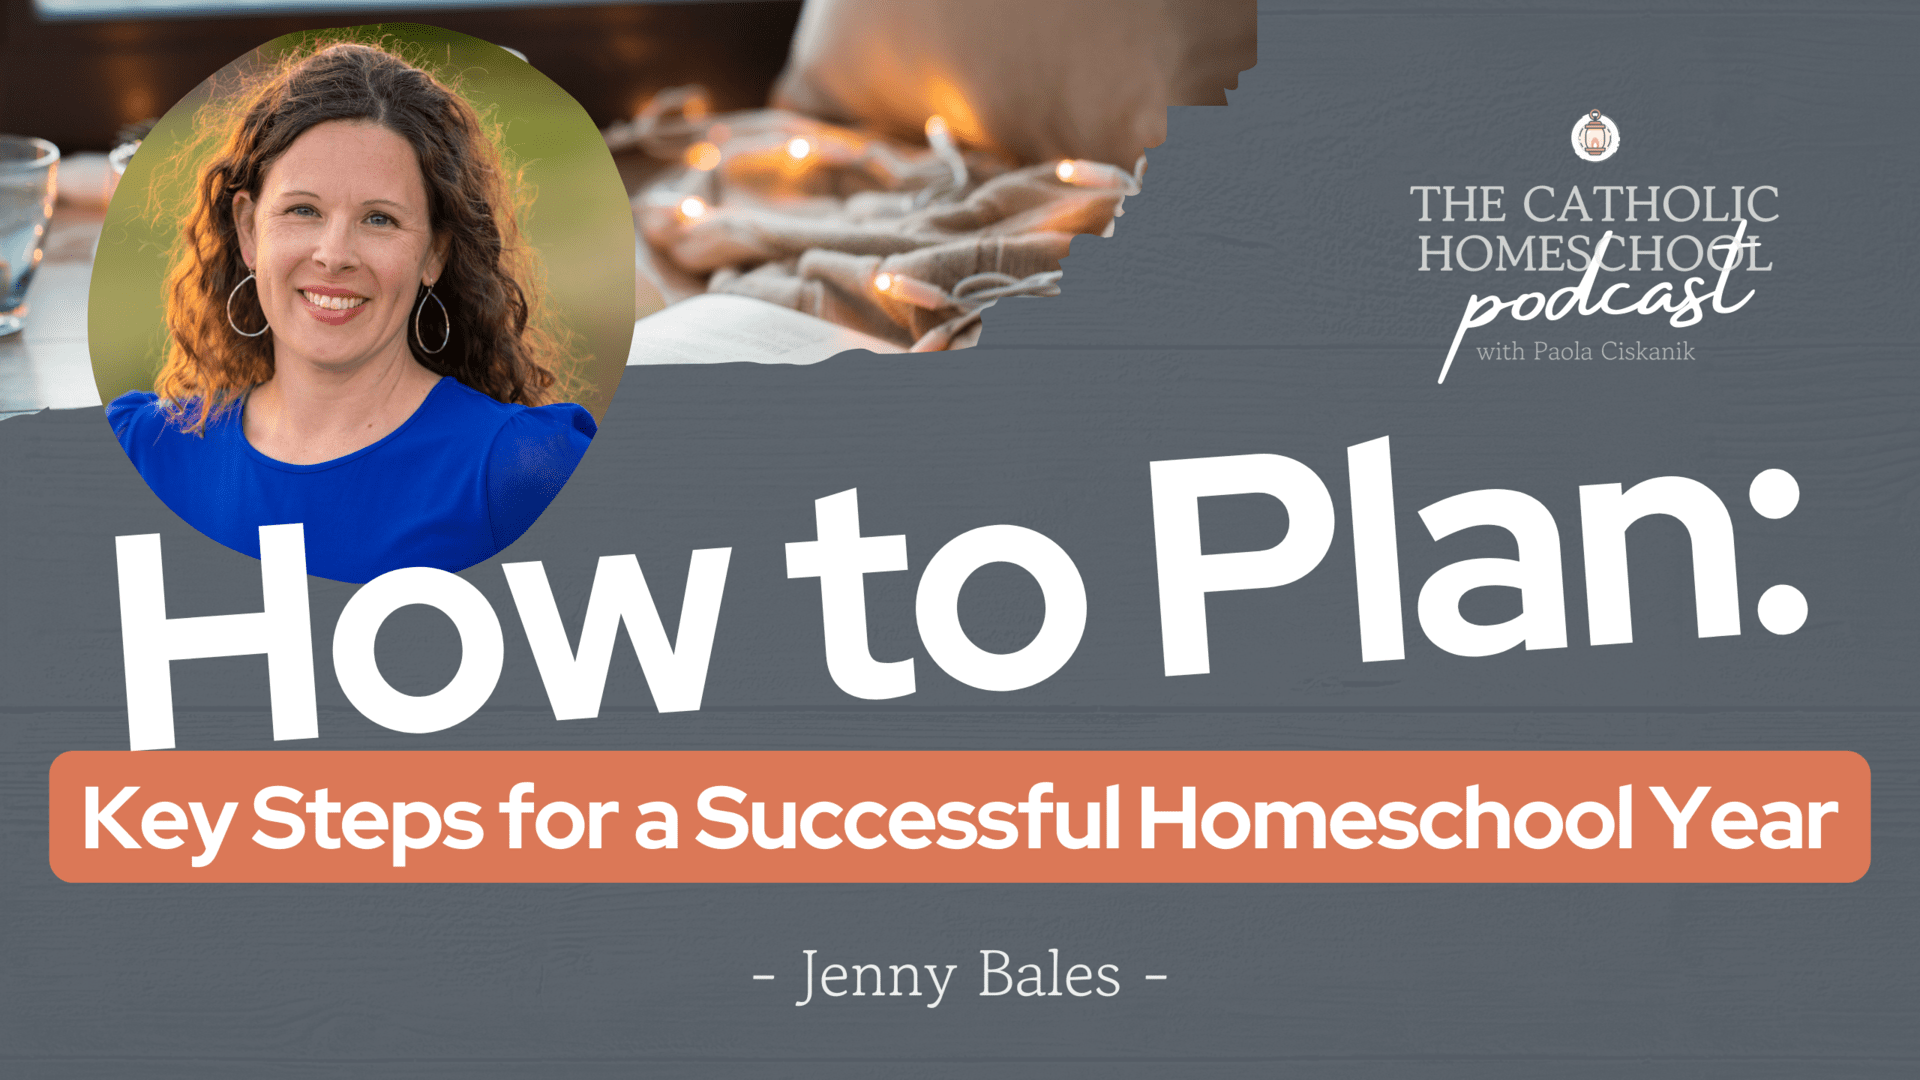 Jenny Bales | How to Plan: Key Steps for a Successful Homeschool Year | The Catholic Homeschool Podcast